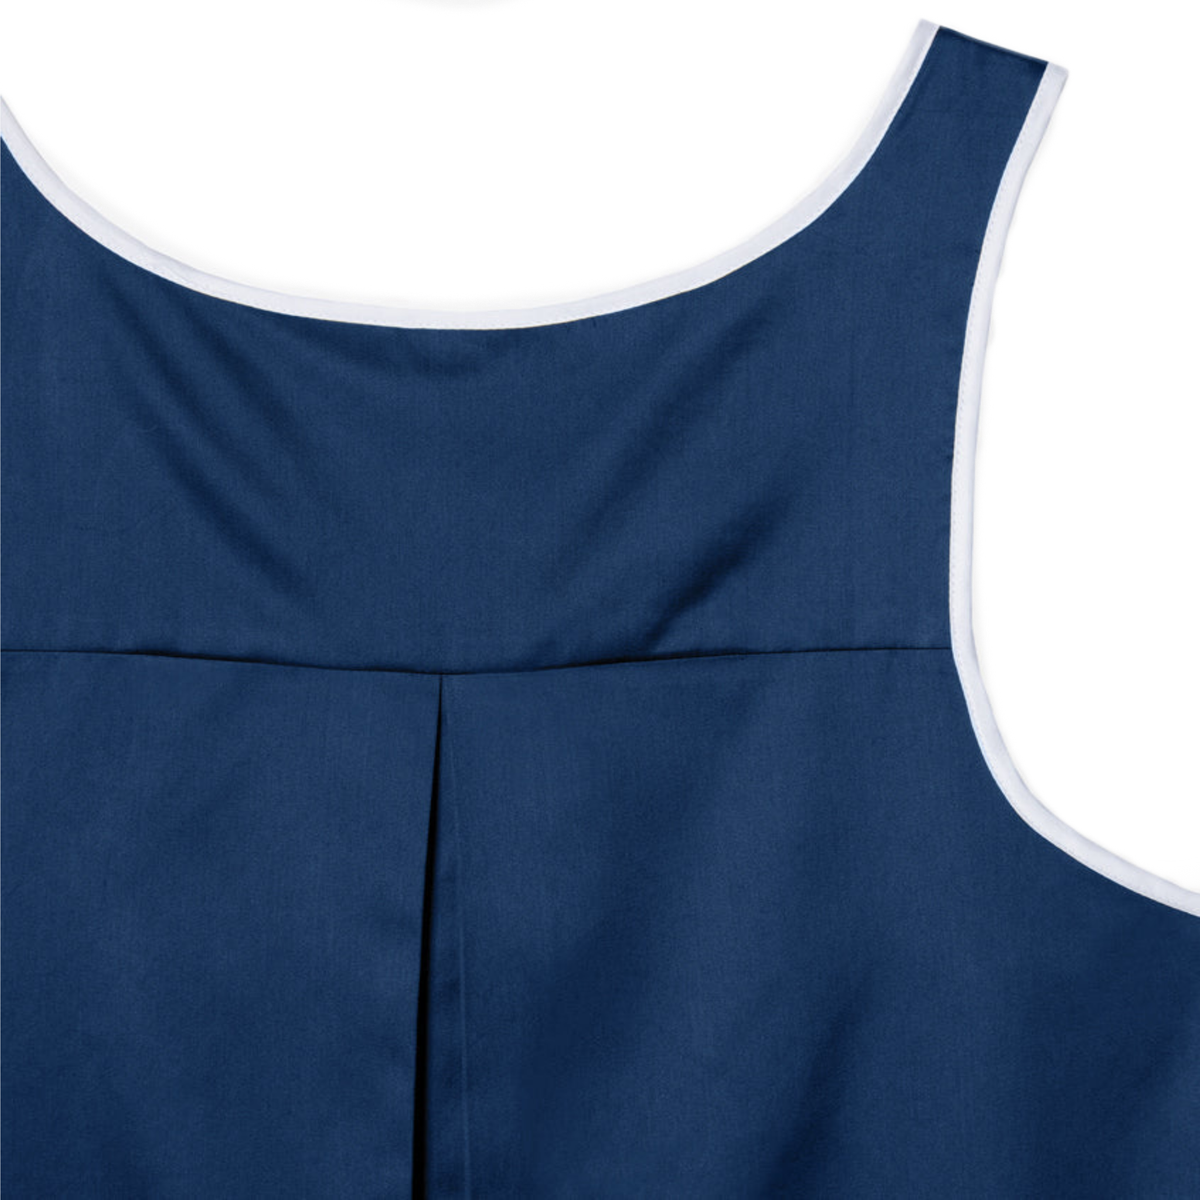 Back Corner View of Navy Sferra Caricia Swing Tank Top against a white background